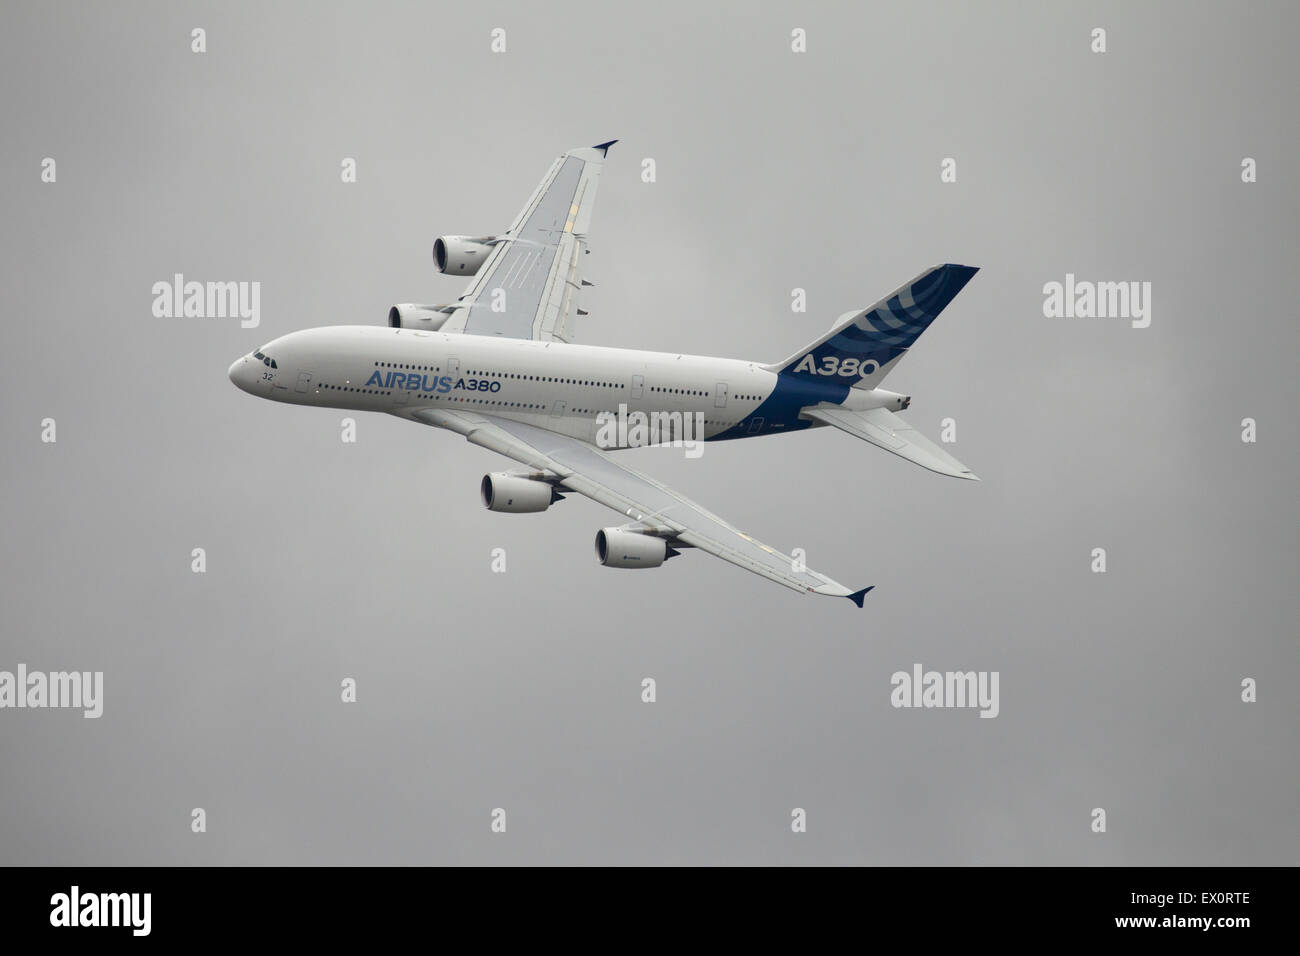 Airbus 380 flight at the 2015 Le Bourget airshow Stock Photo